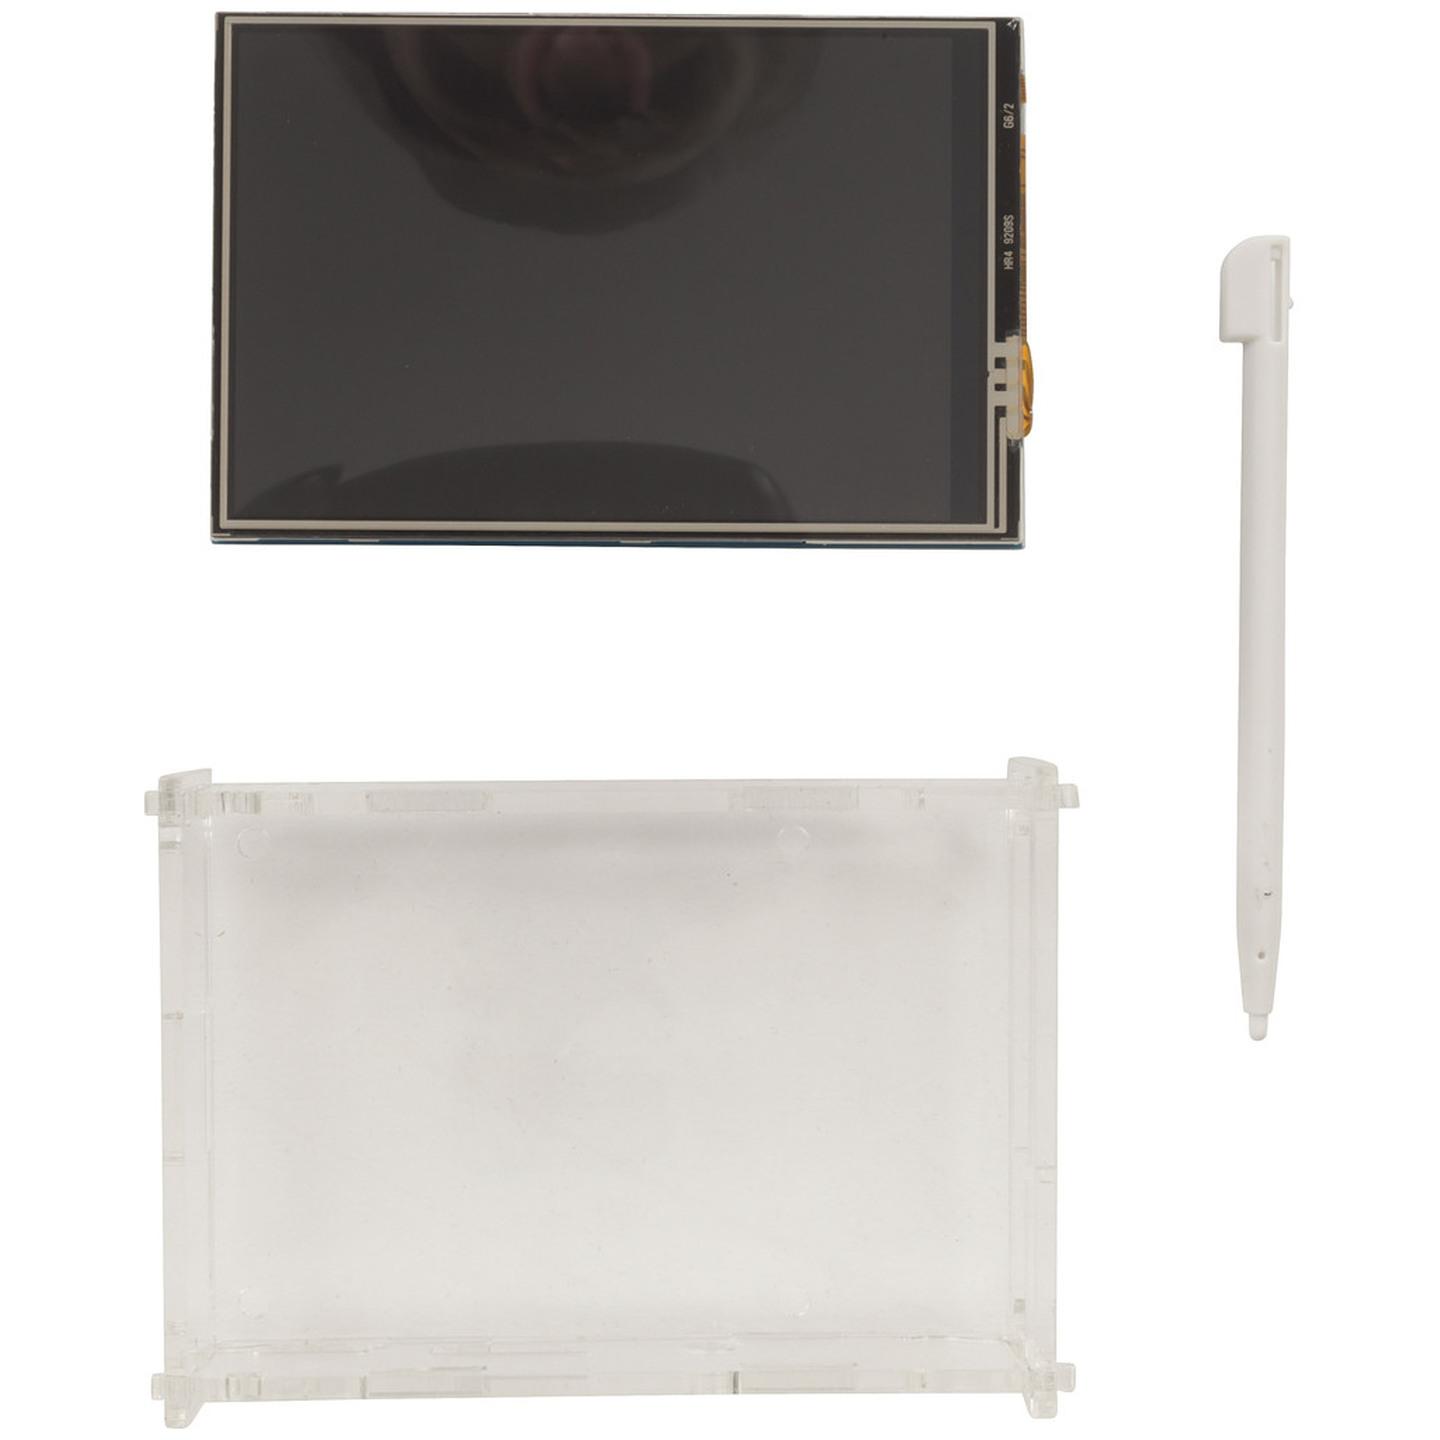 Duinotech Raspberry Pi 3.5 Inch LCD Touch Screen Display with Stylus and Enclosure